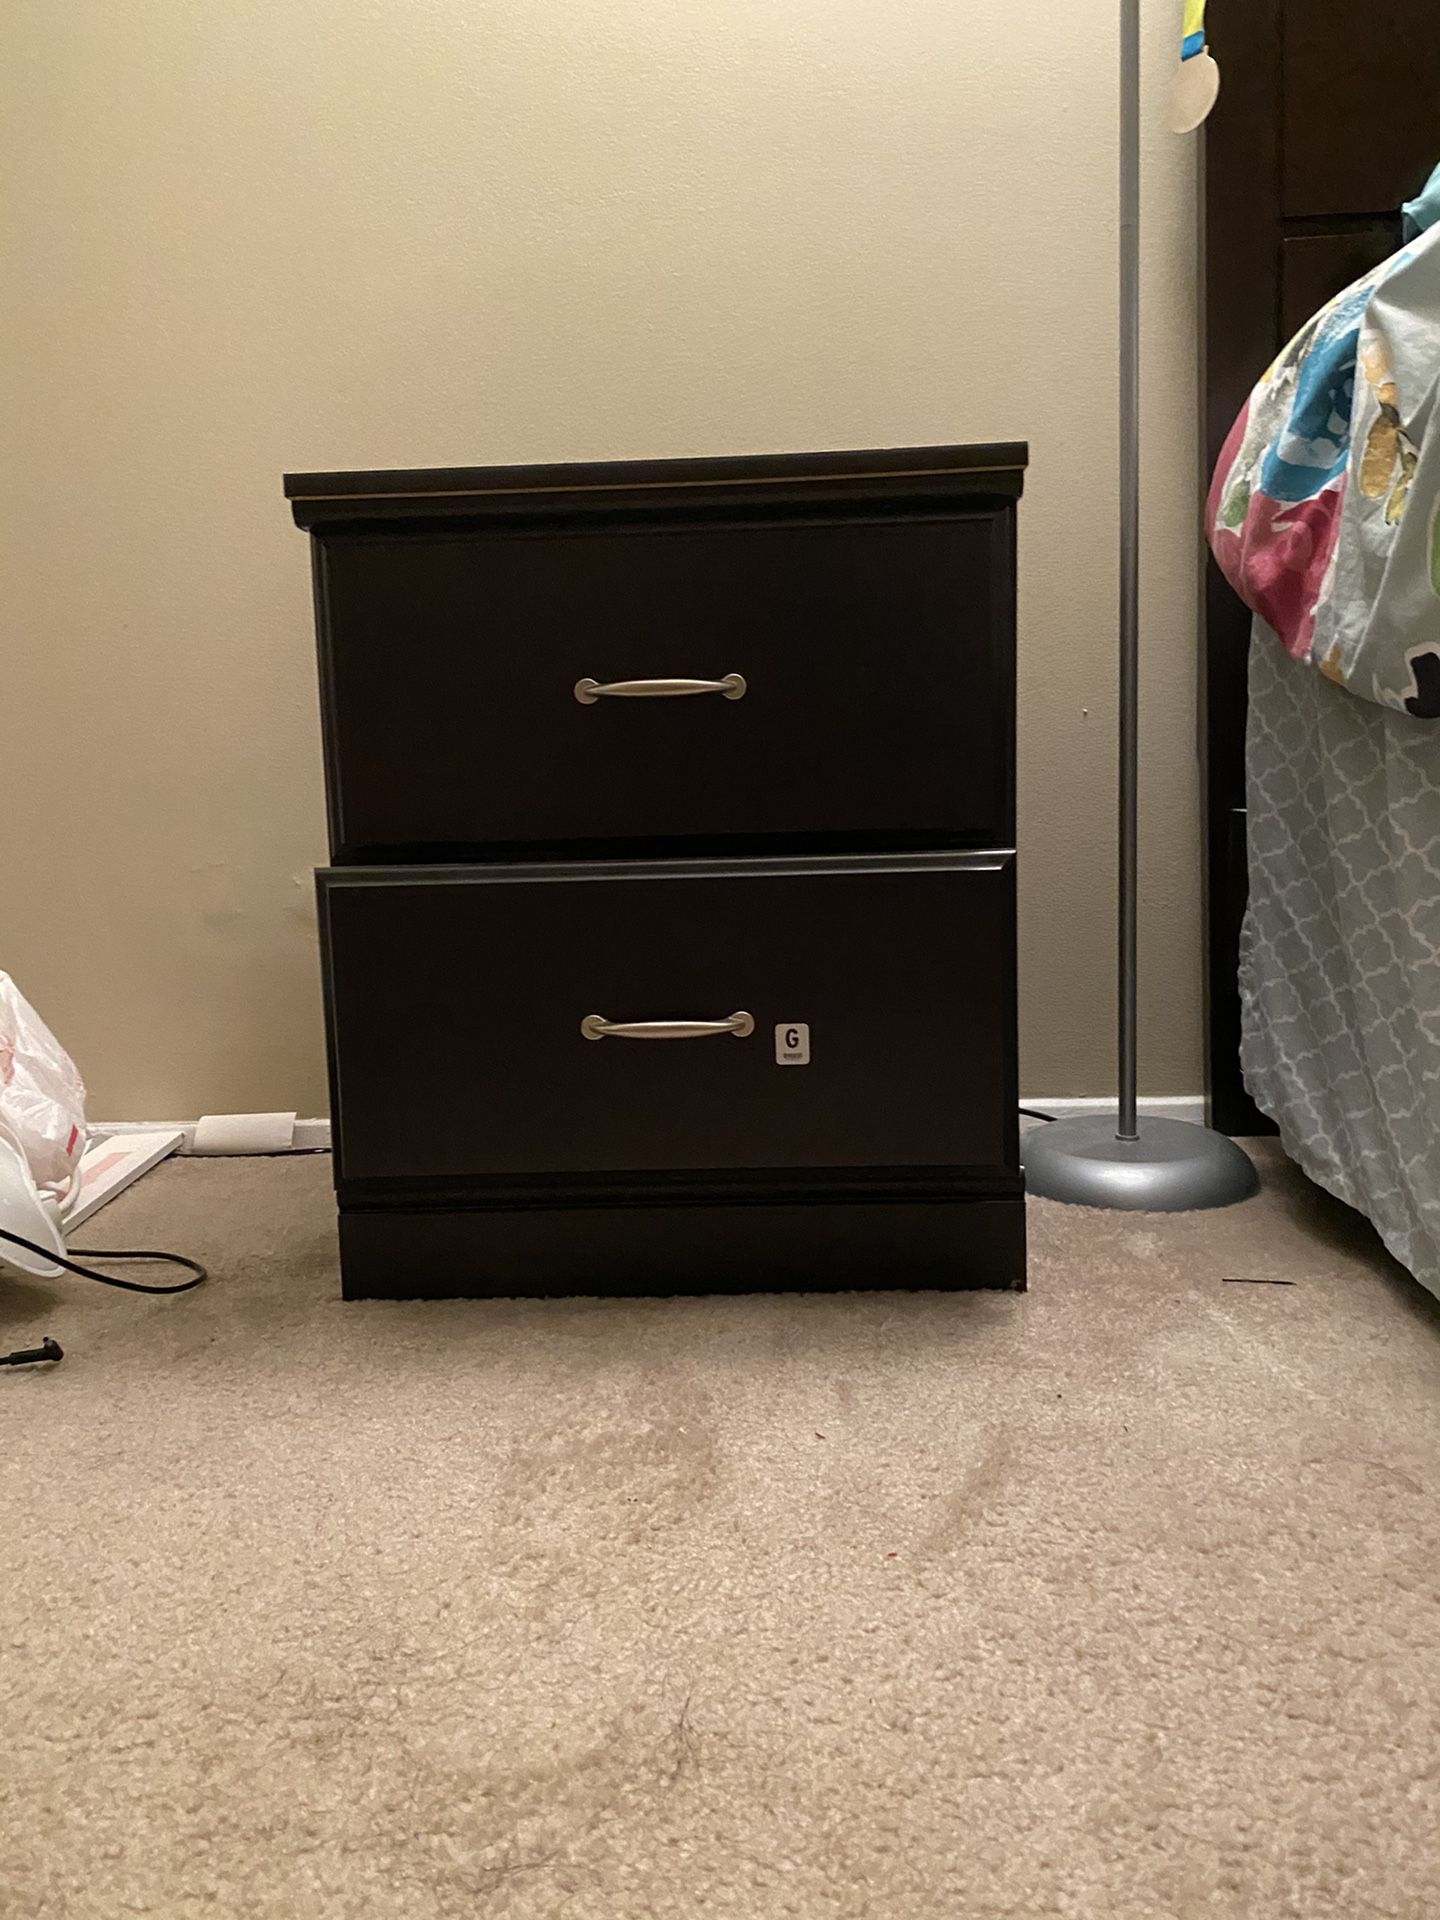 One night stand with 2 drawers